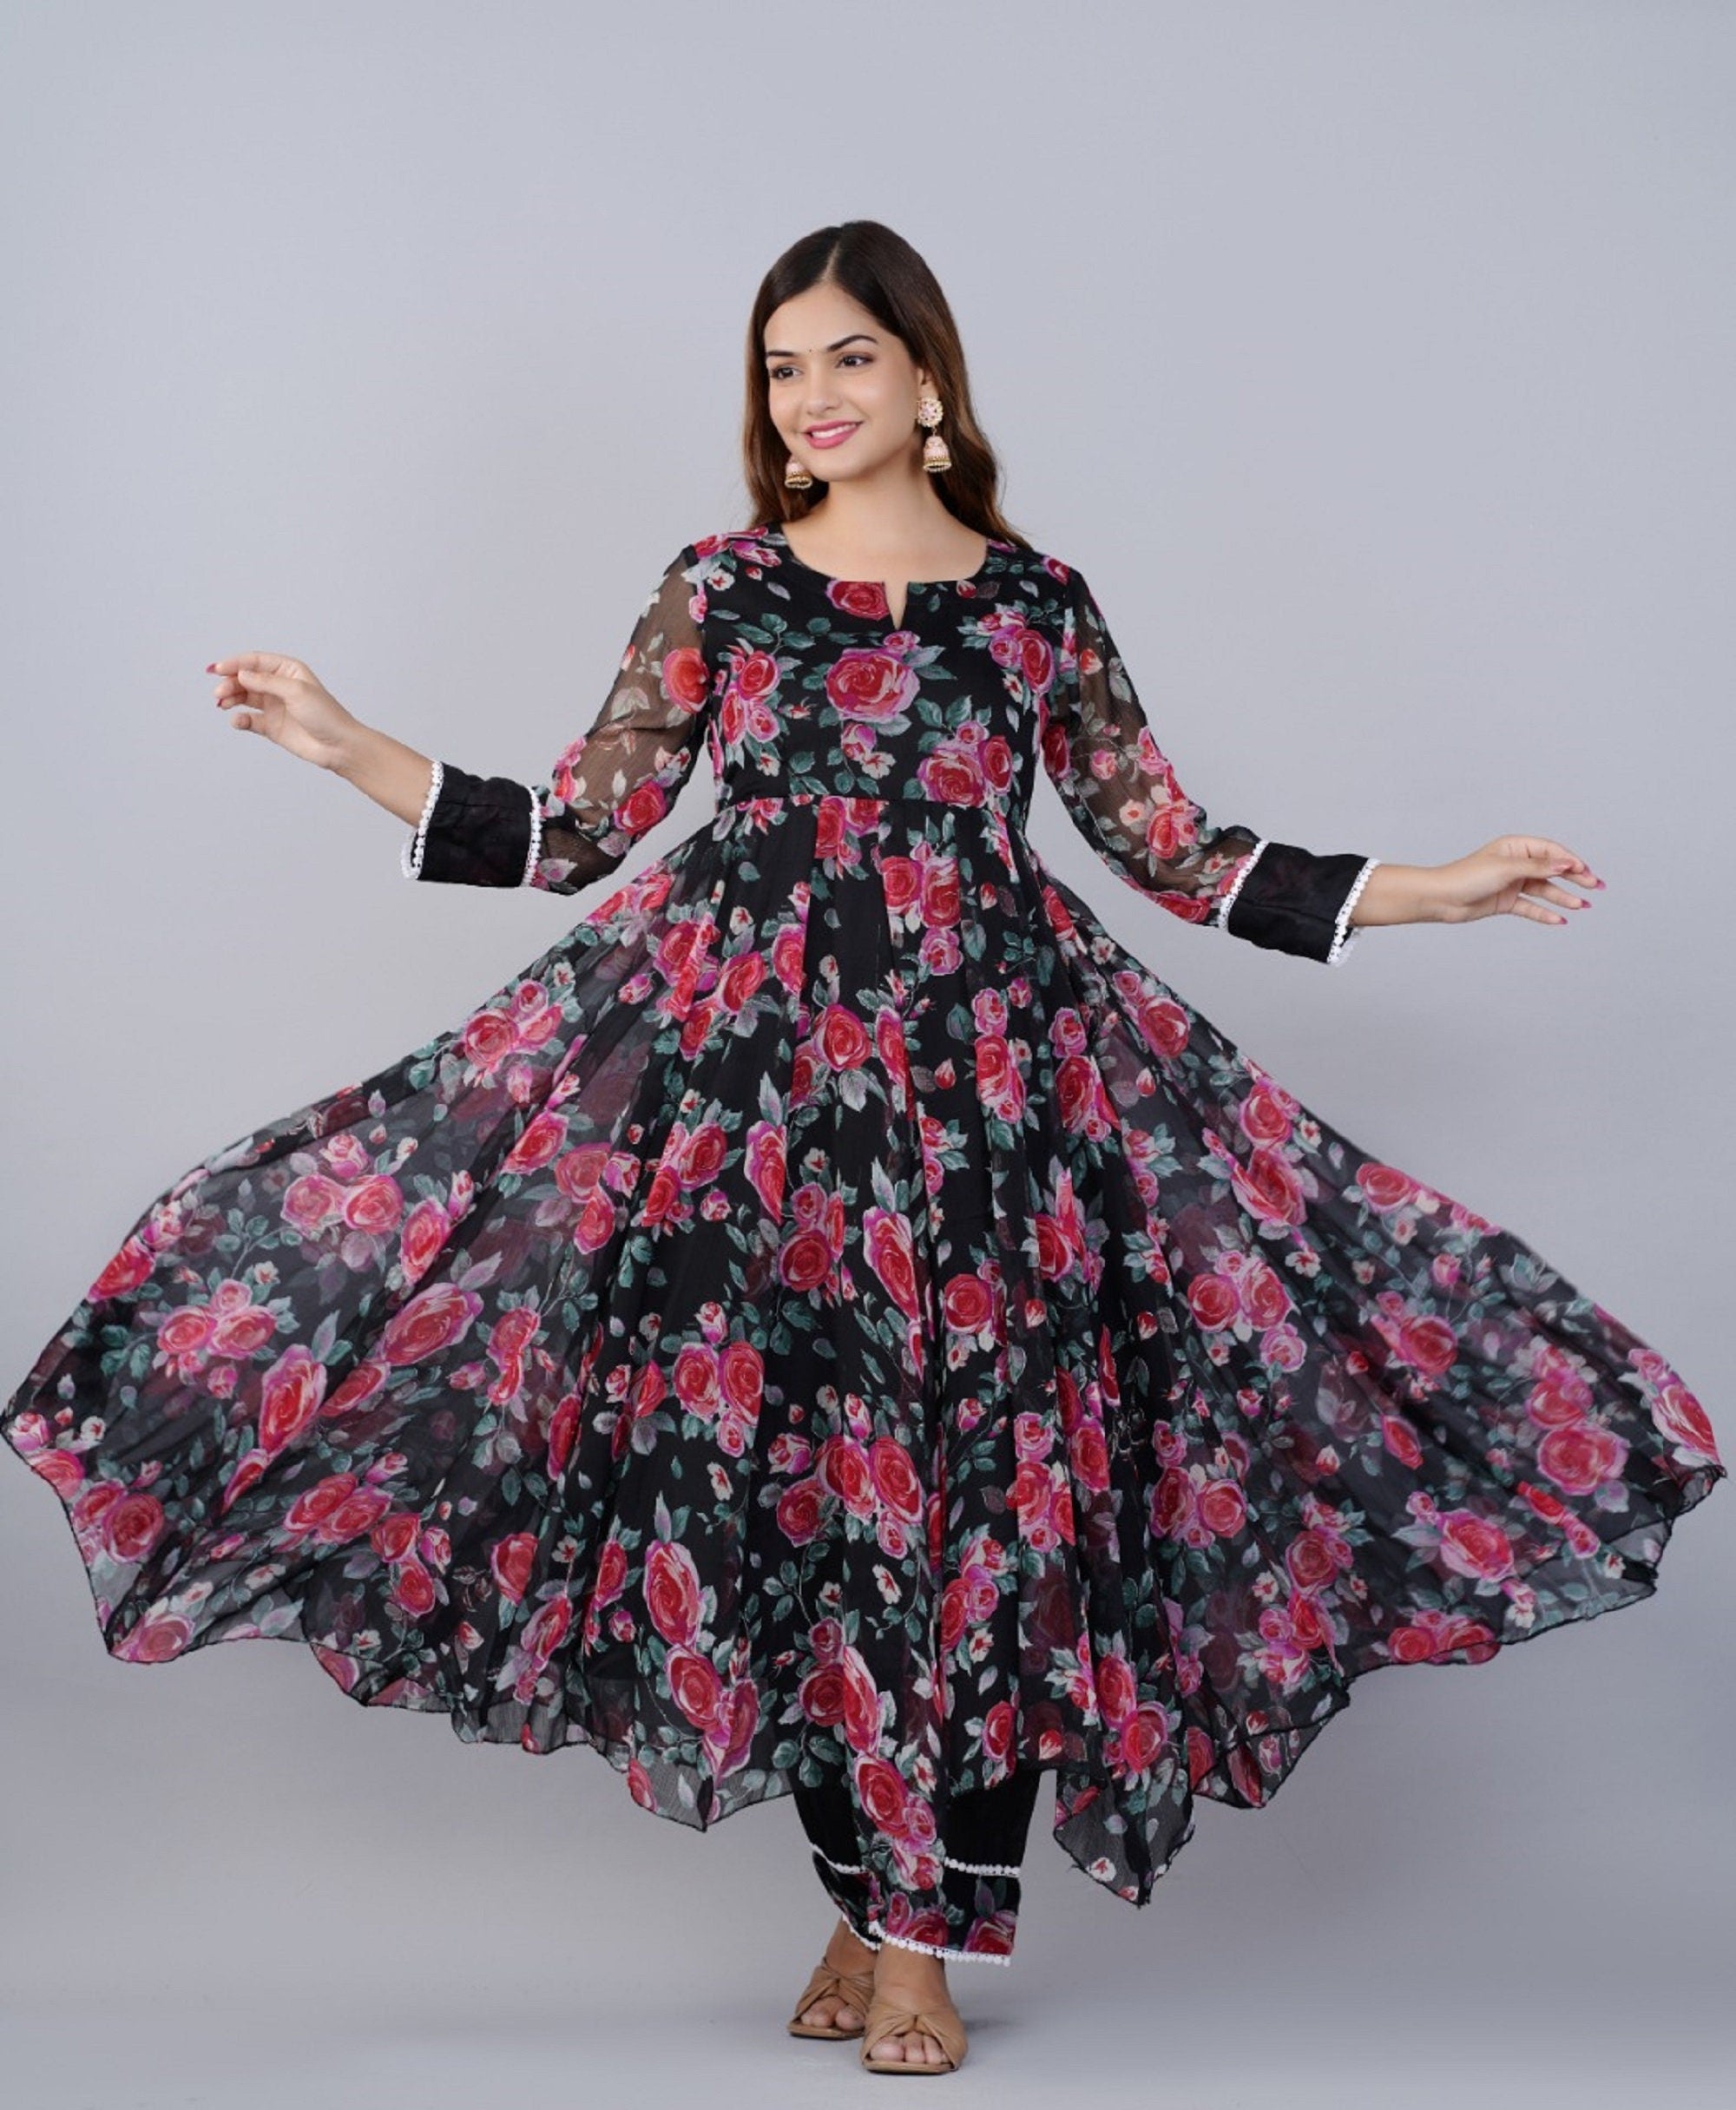 Alibaba Indian Children Gown Dresses Party| Alibaba.com